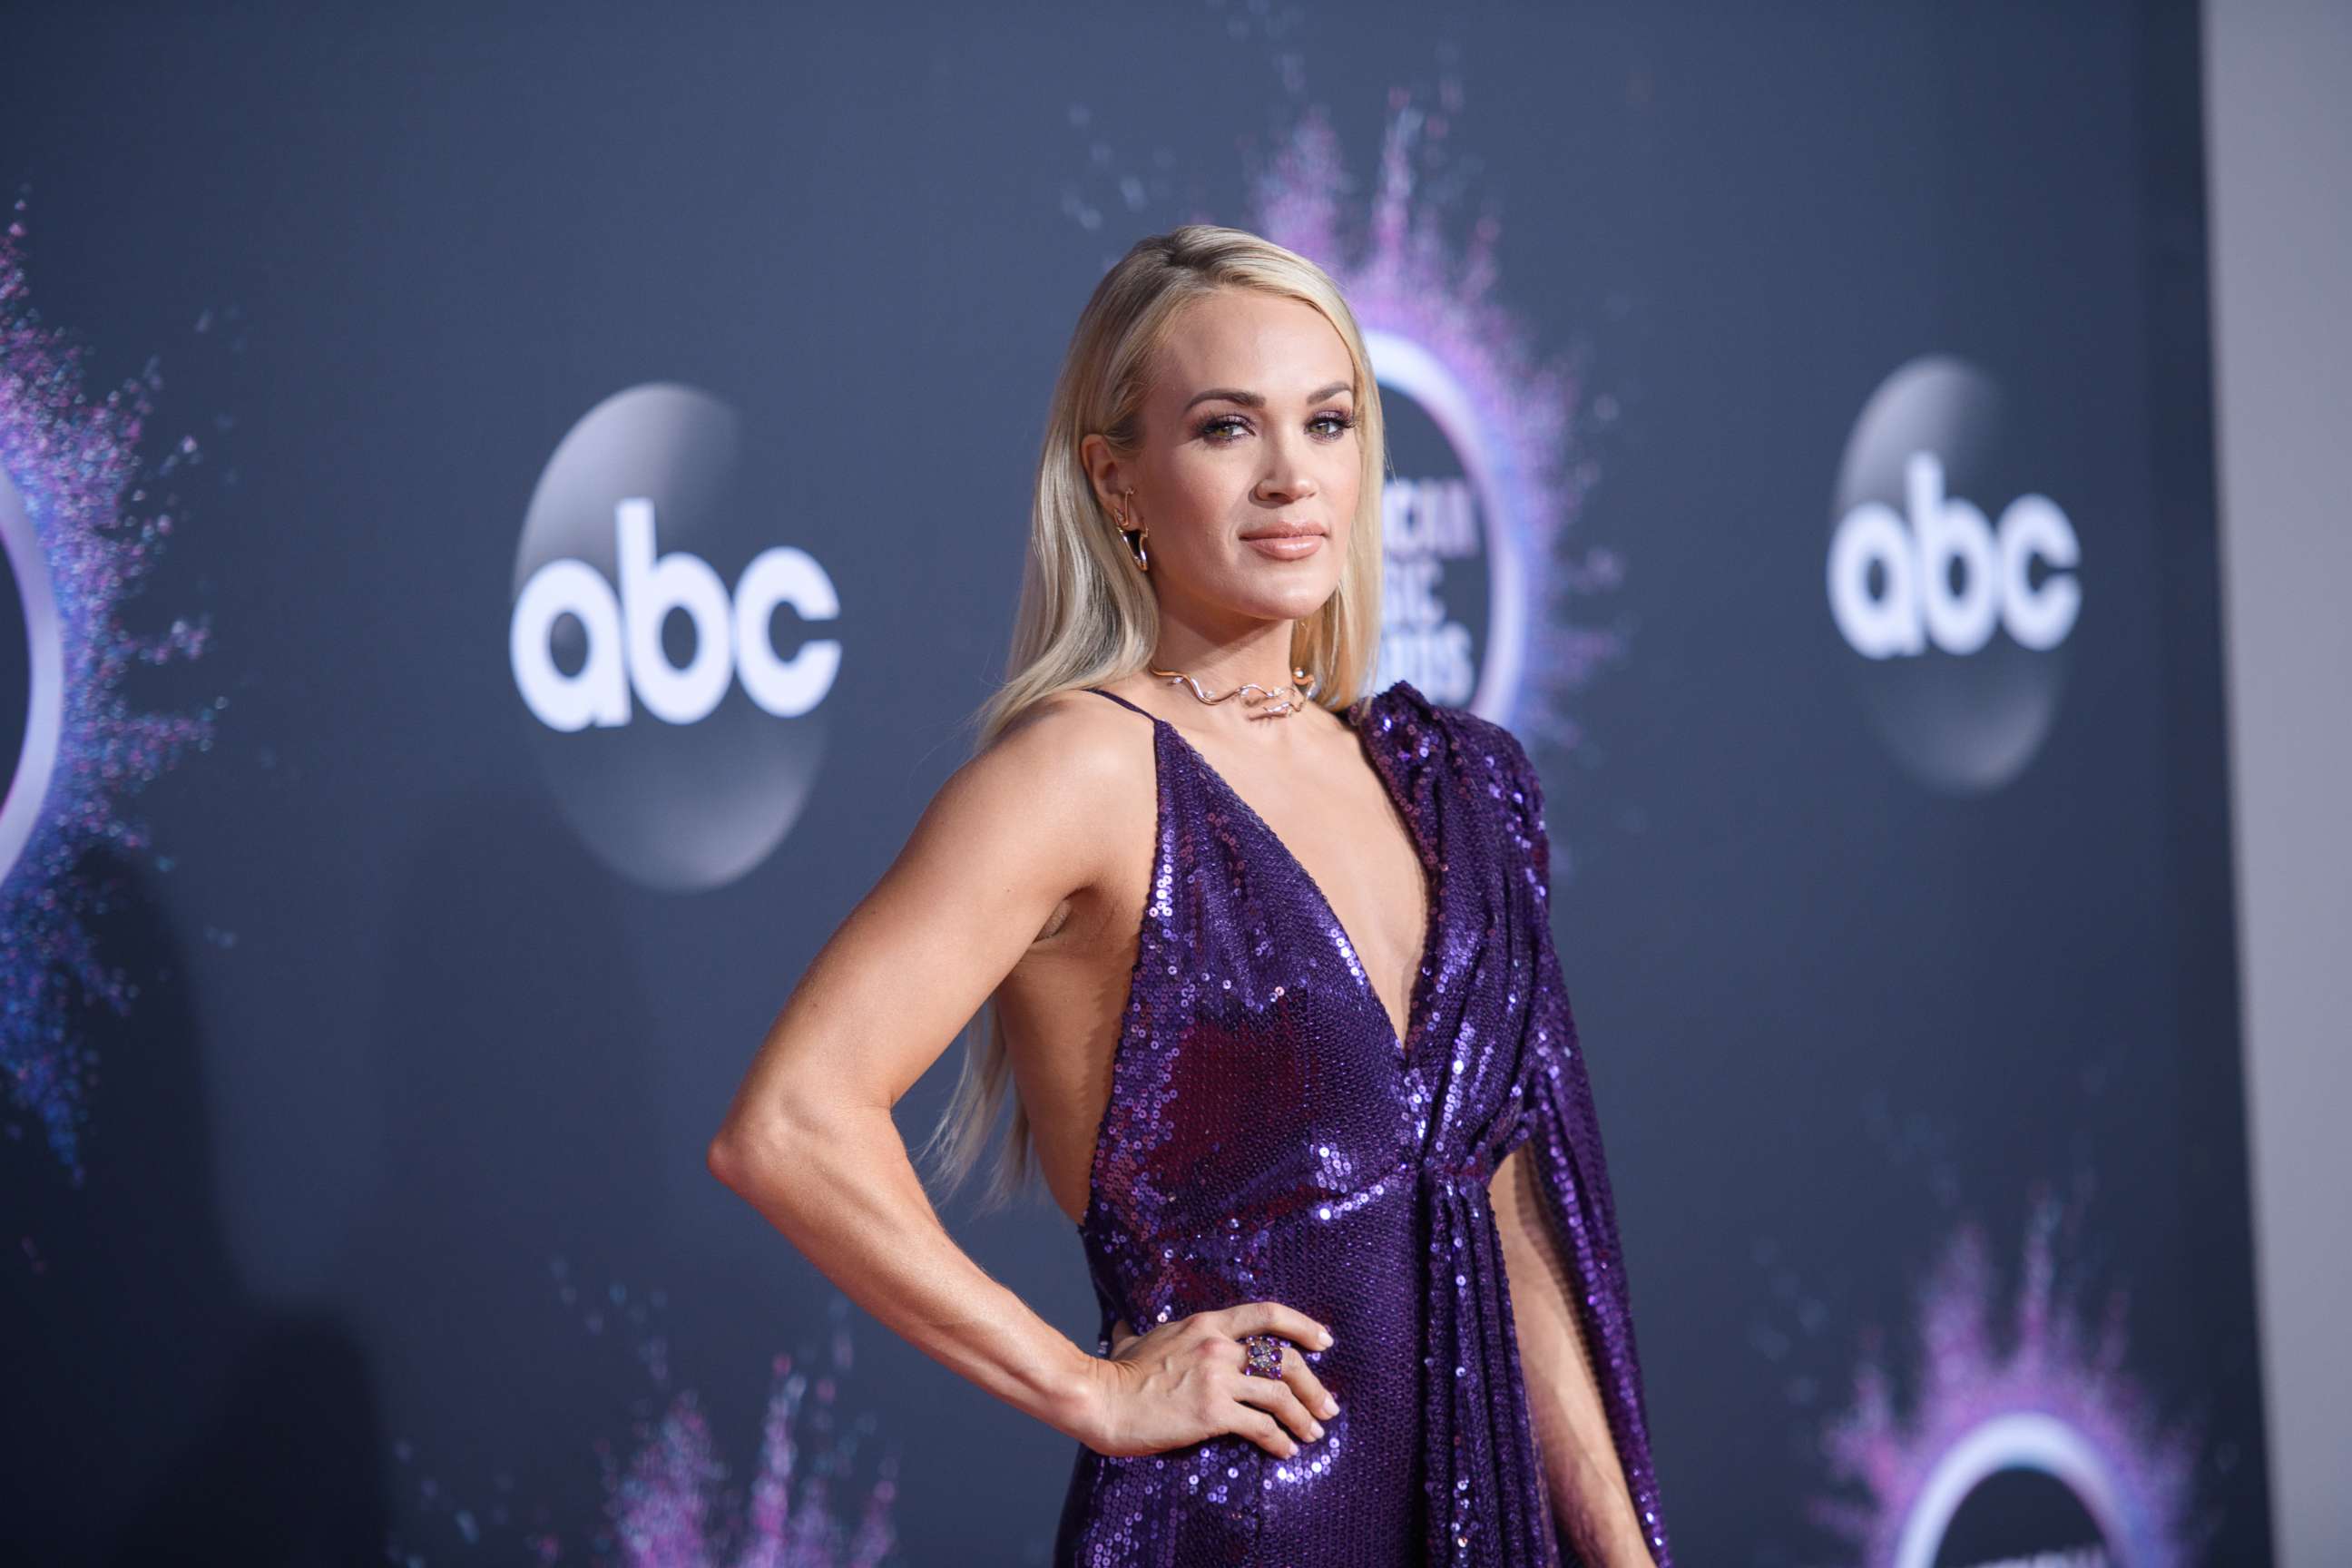 PHOTO: Carrie Underwood is seen at the American Music Awards, Nov. 24, 2019.